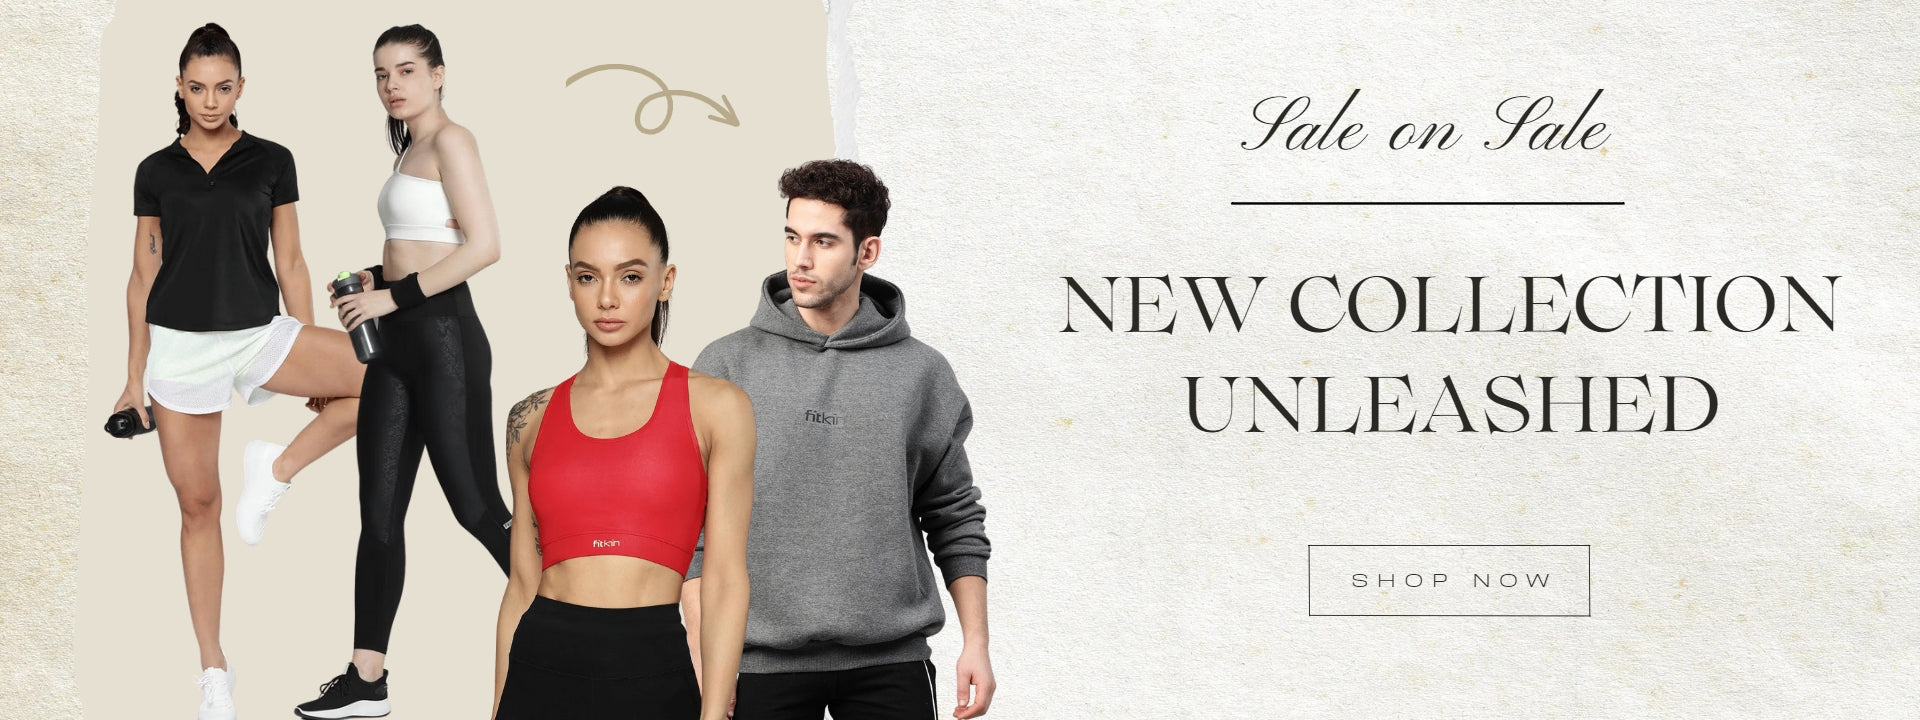 Buy Gym Wear & Activewear for your active lifestyle – Fitkin